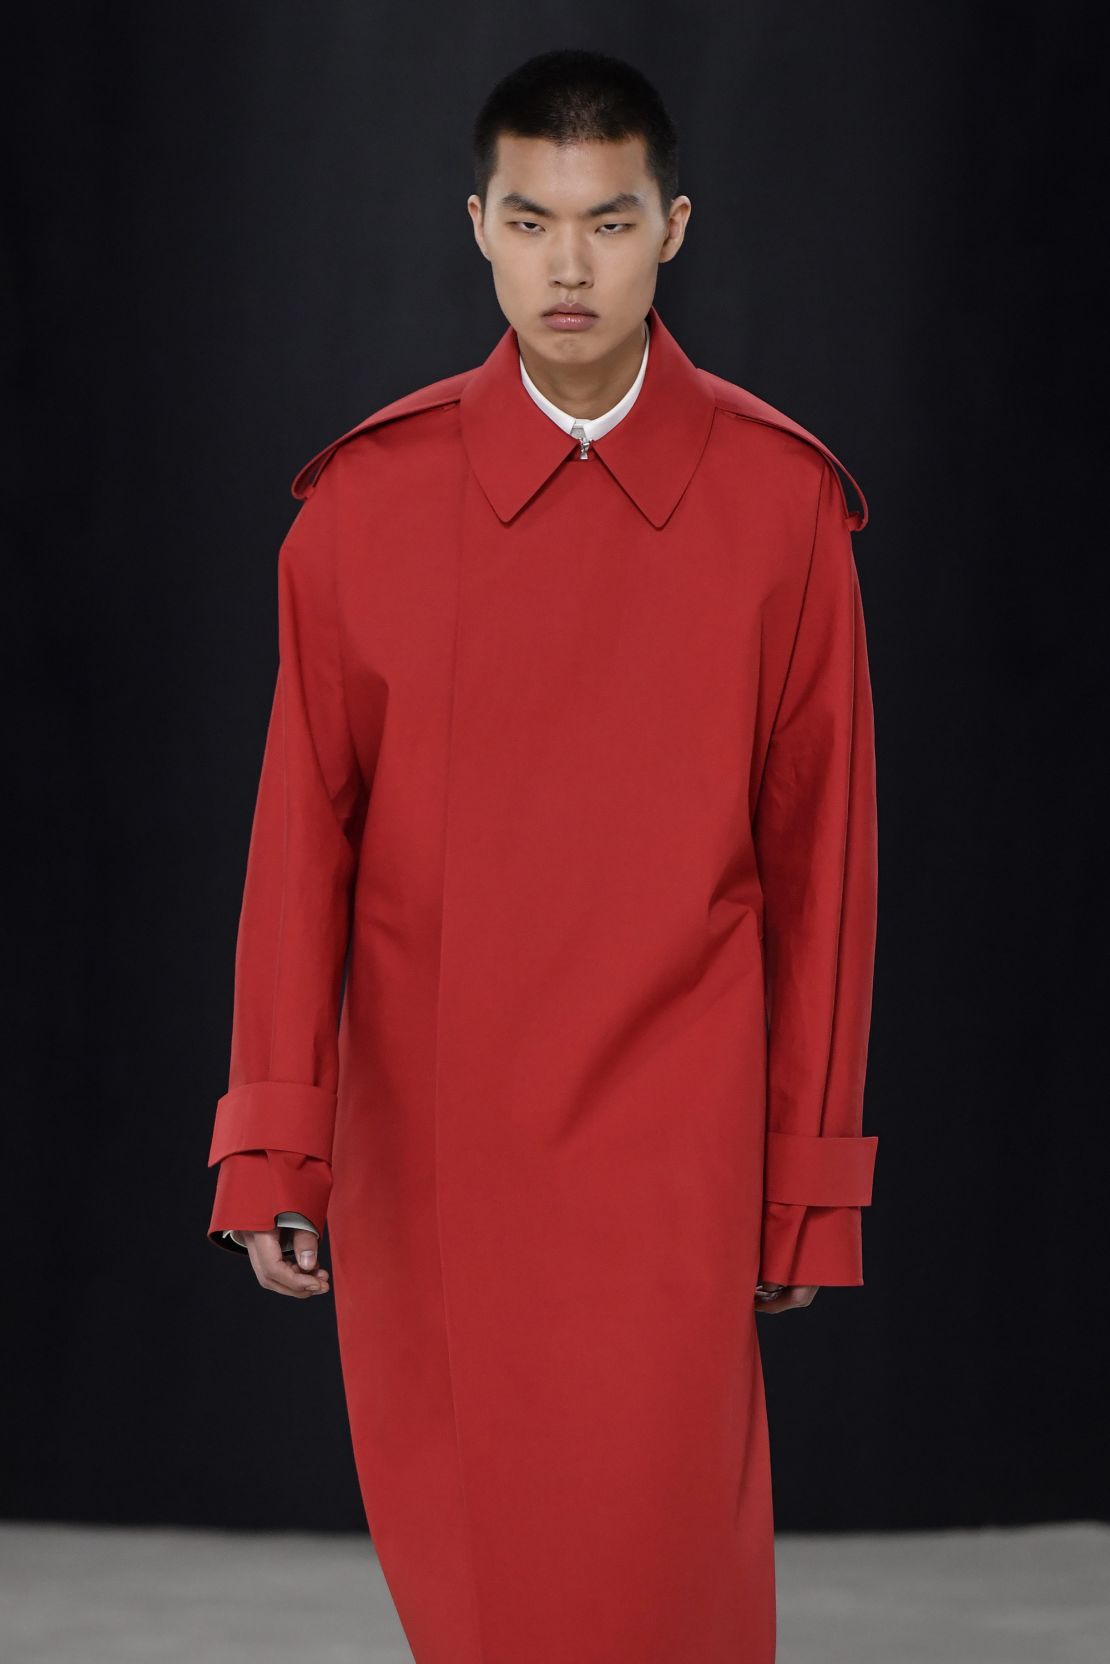 Creative director Maximillian Davis infused the entire collection with Ferragamo's trademark shade of red.